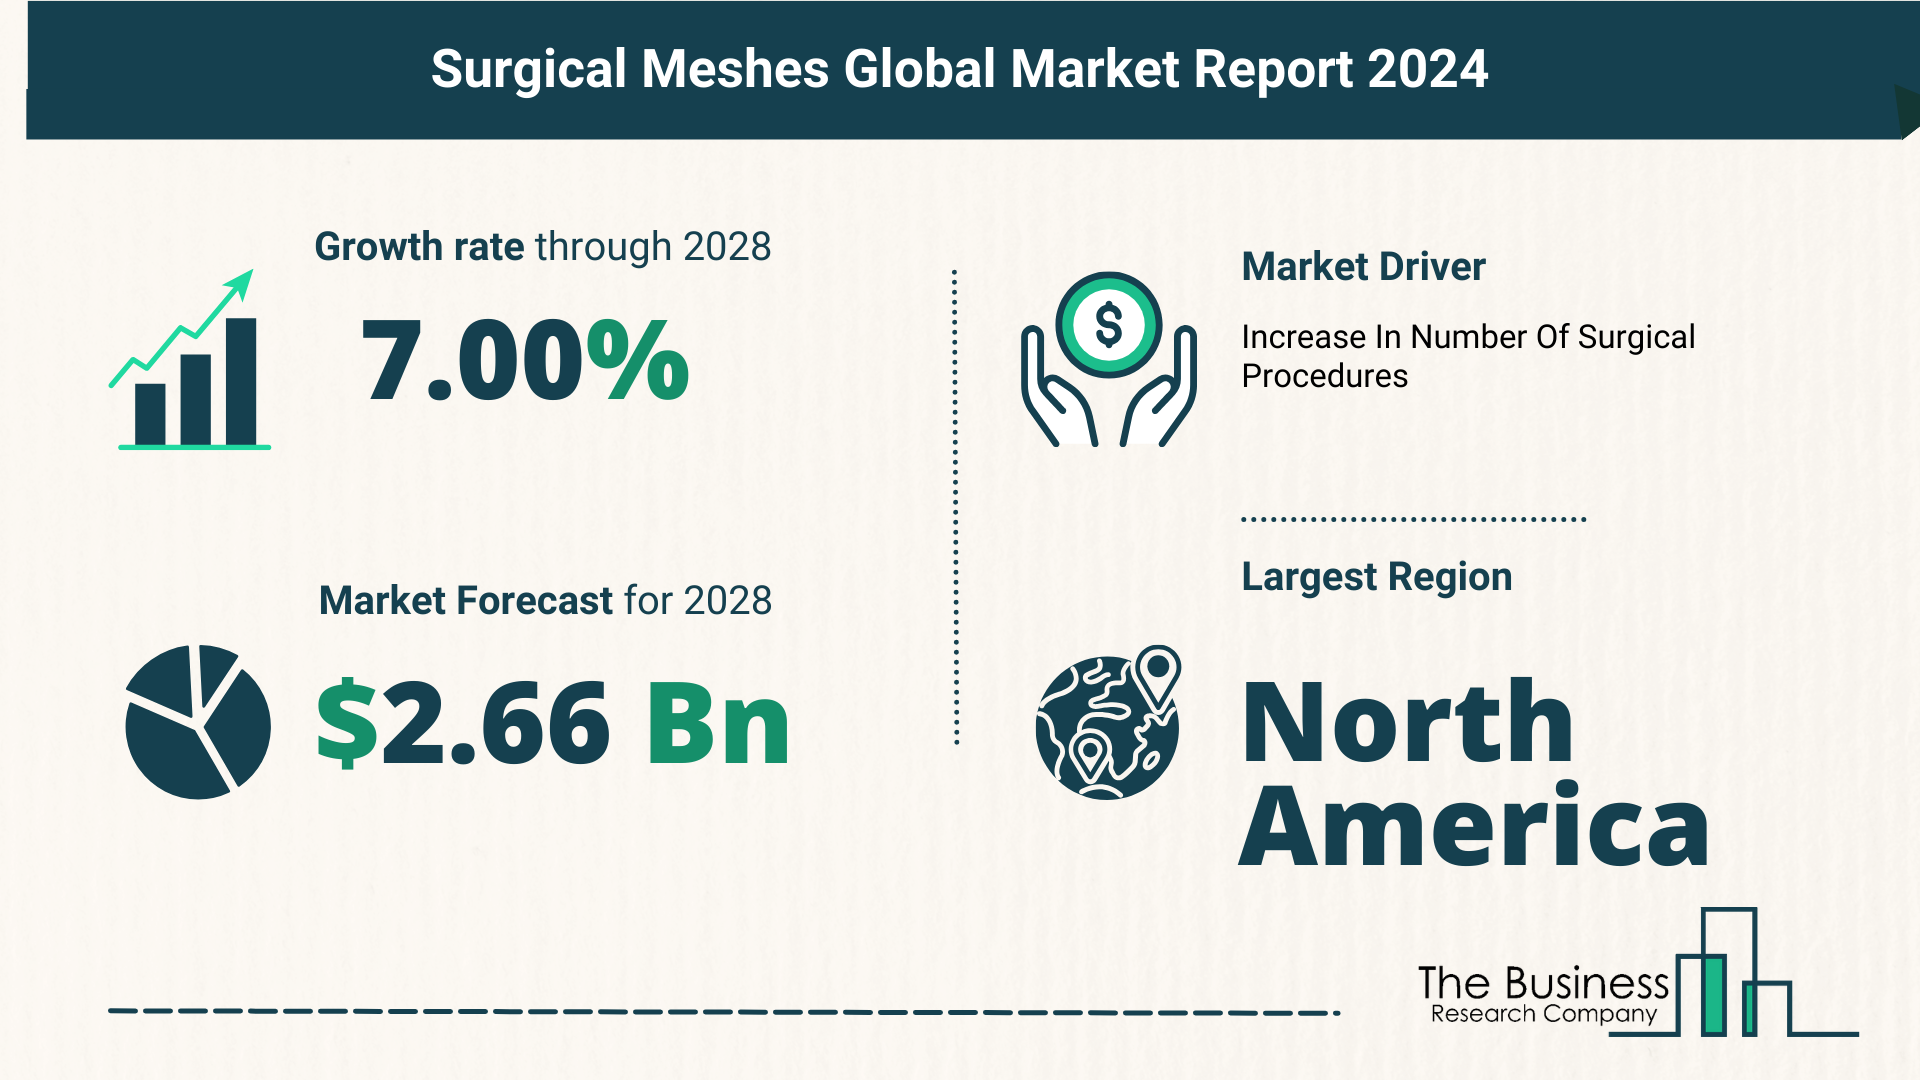 What Is The Forecast Growth Rate For The Surgical Meshes Market?